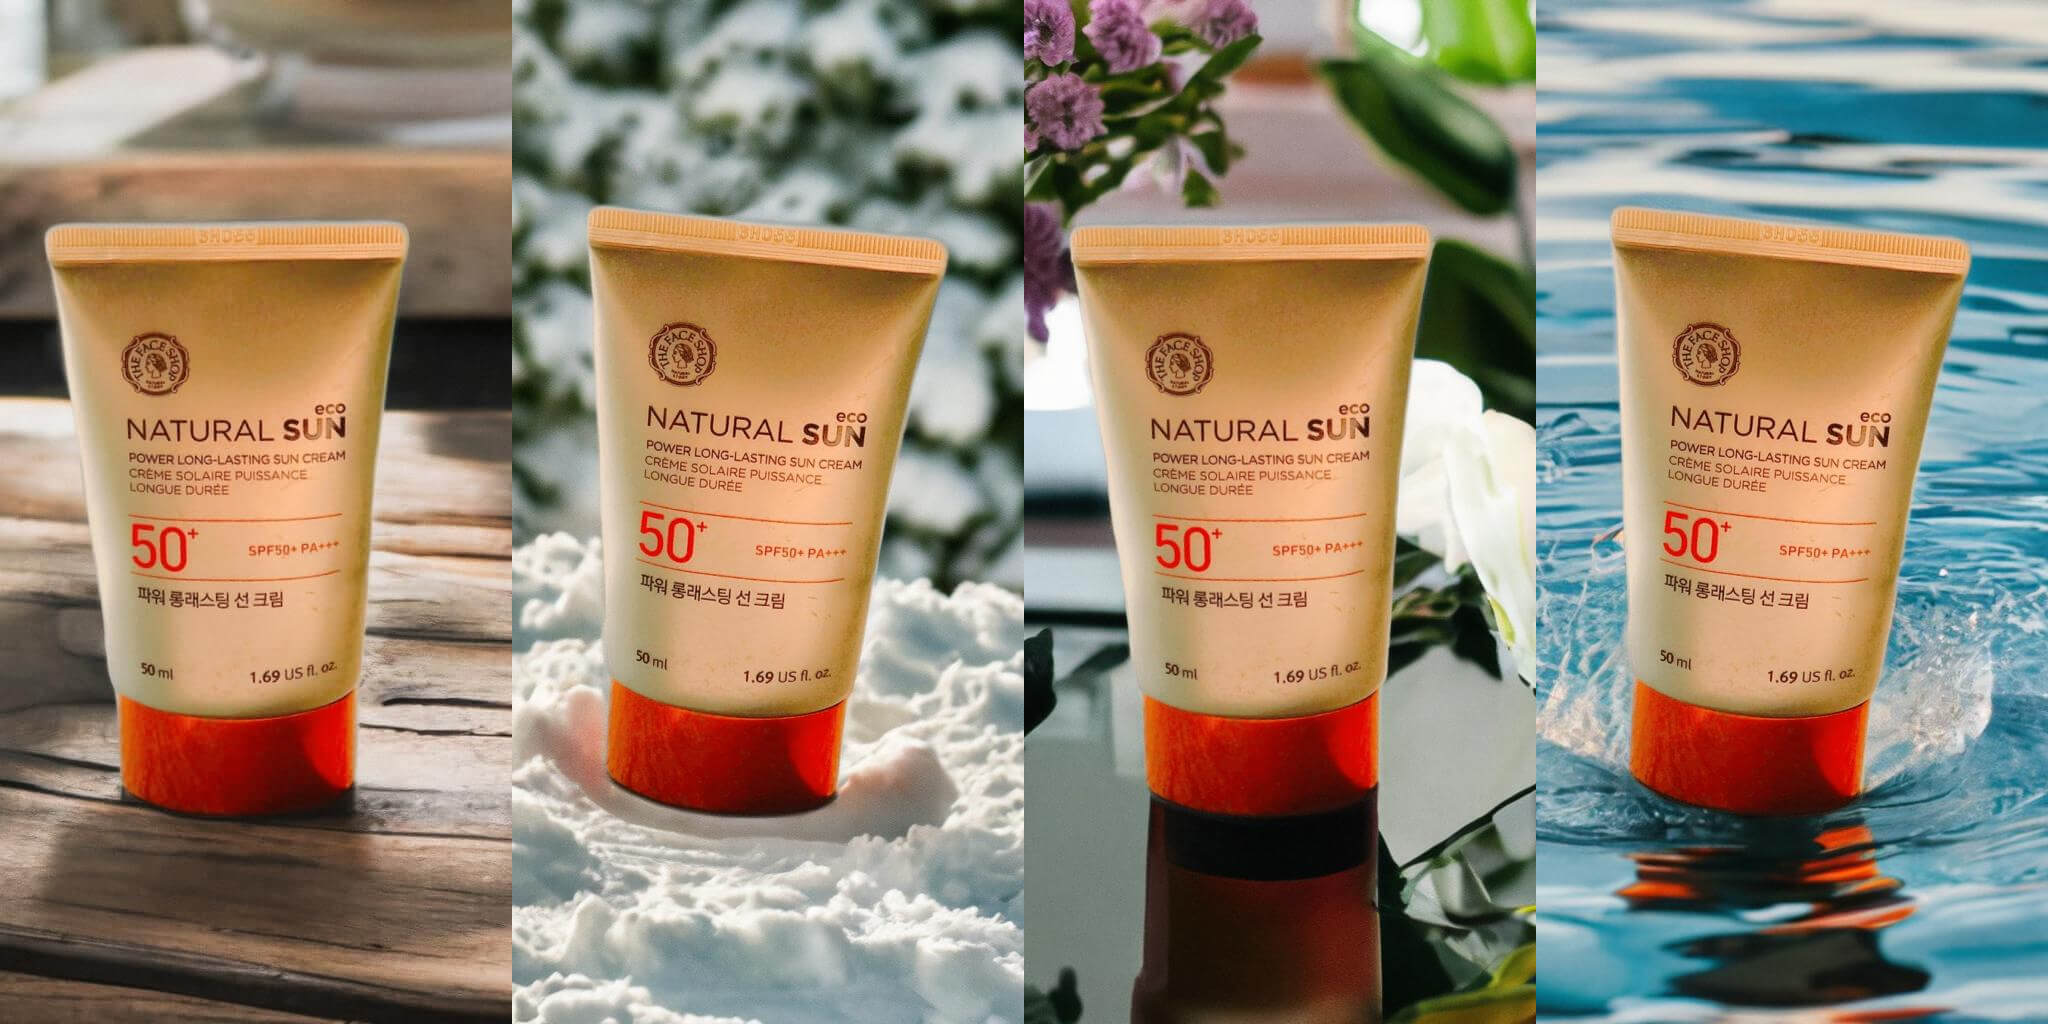 Images of a skincare product